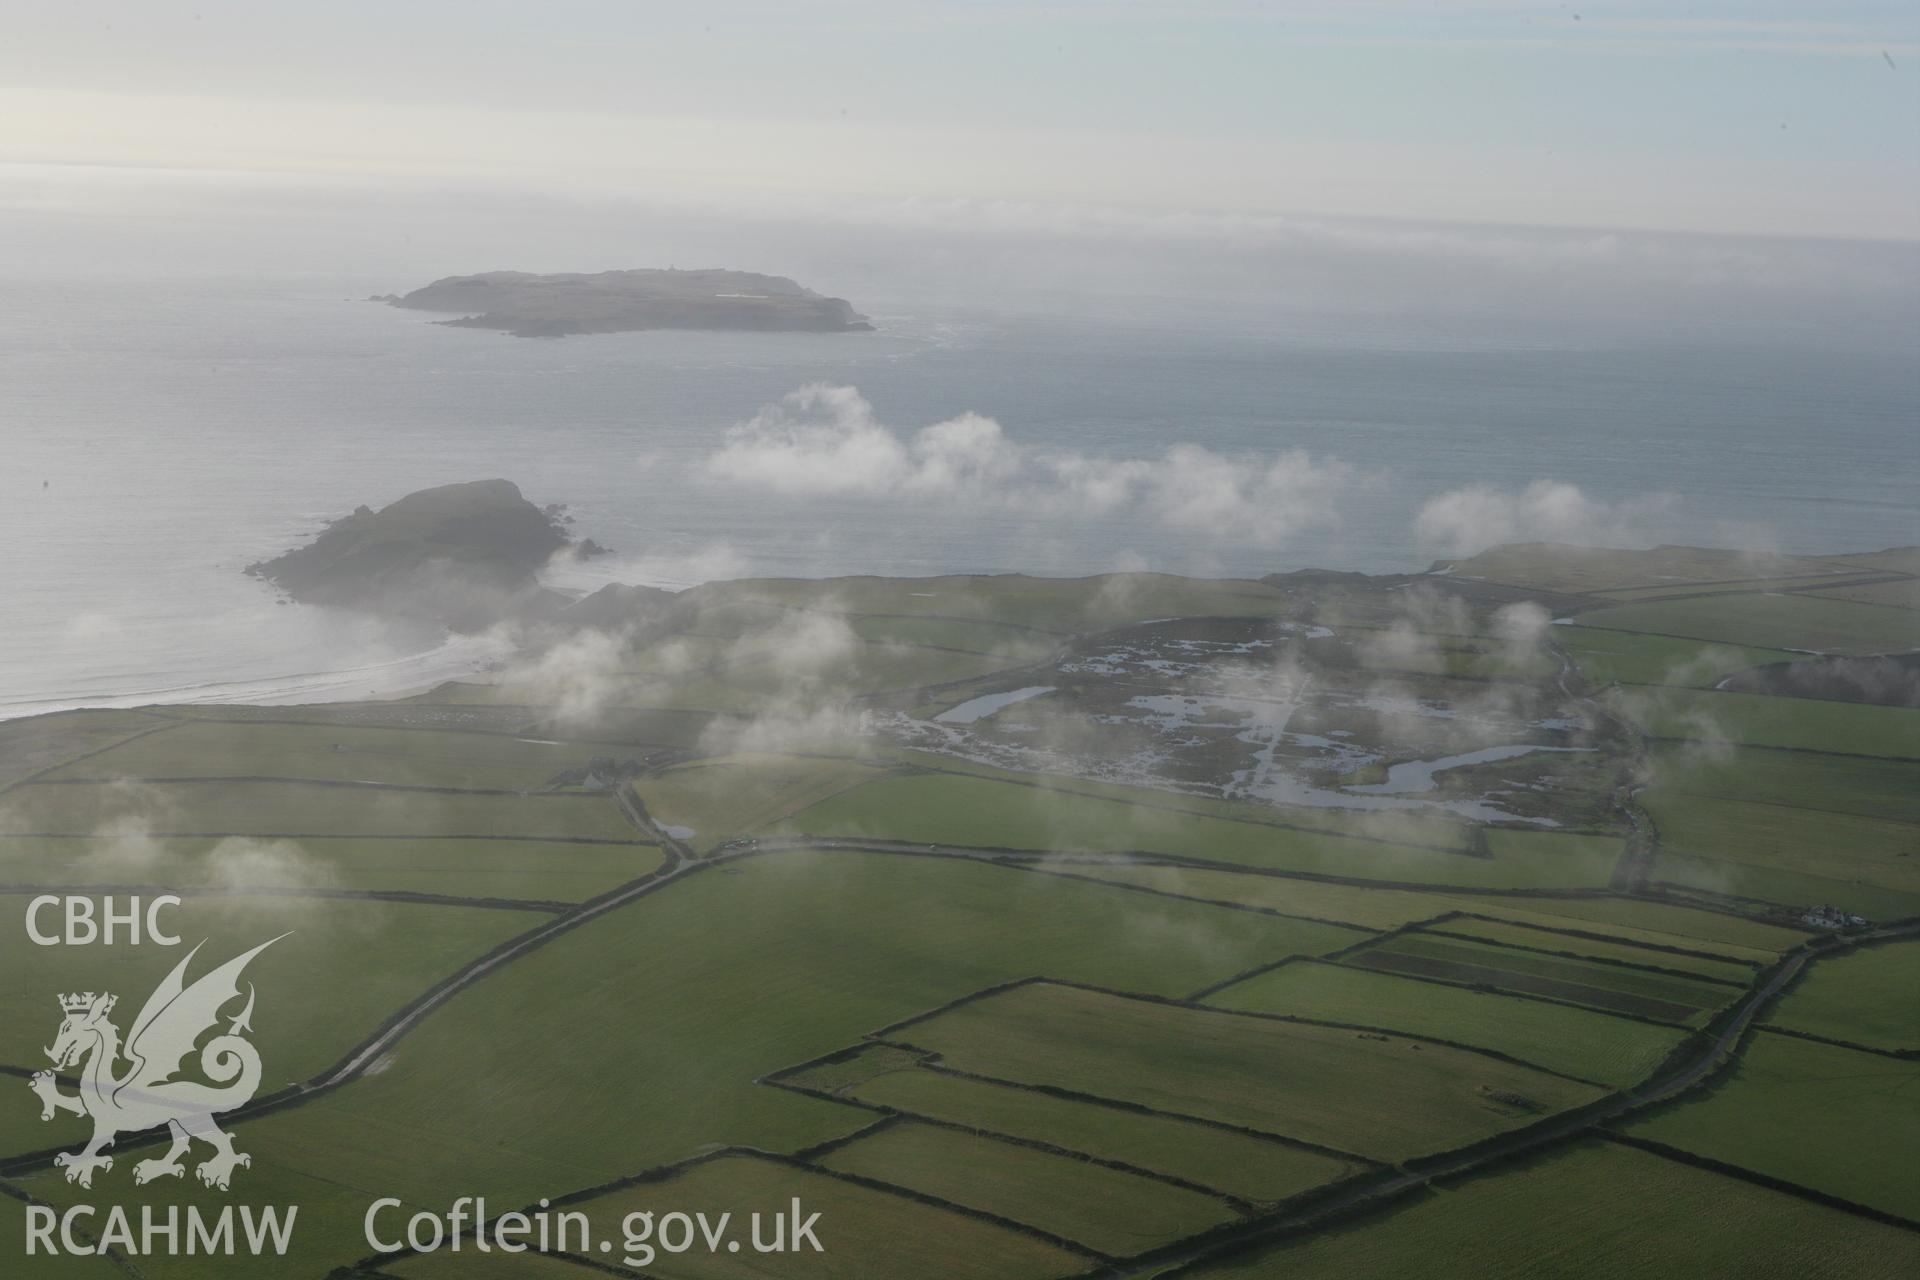 RCAHMW colour oblique aerial photograph of Skokholm Island. A distant landscape shot. Taken on 28 January 2009 by Toby Driver